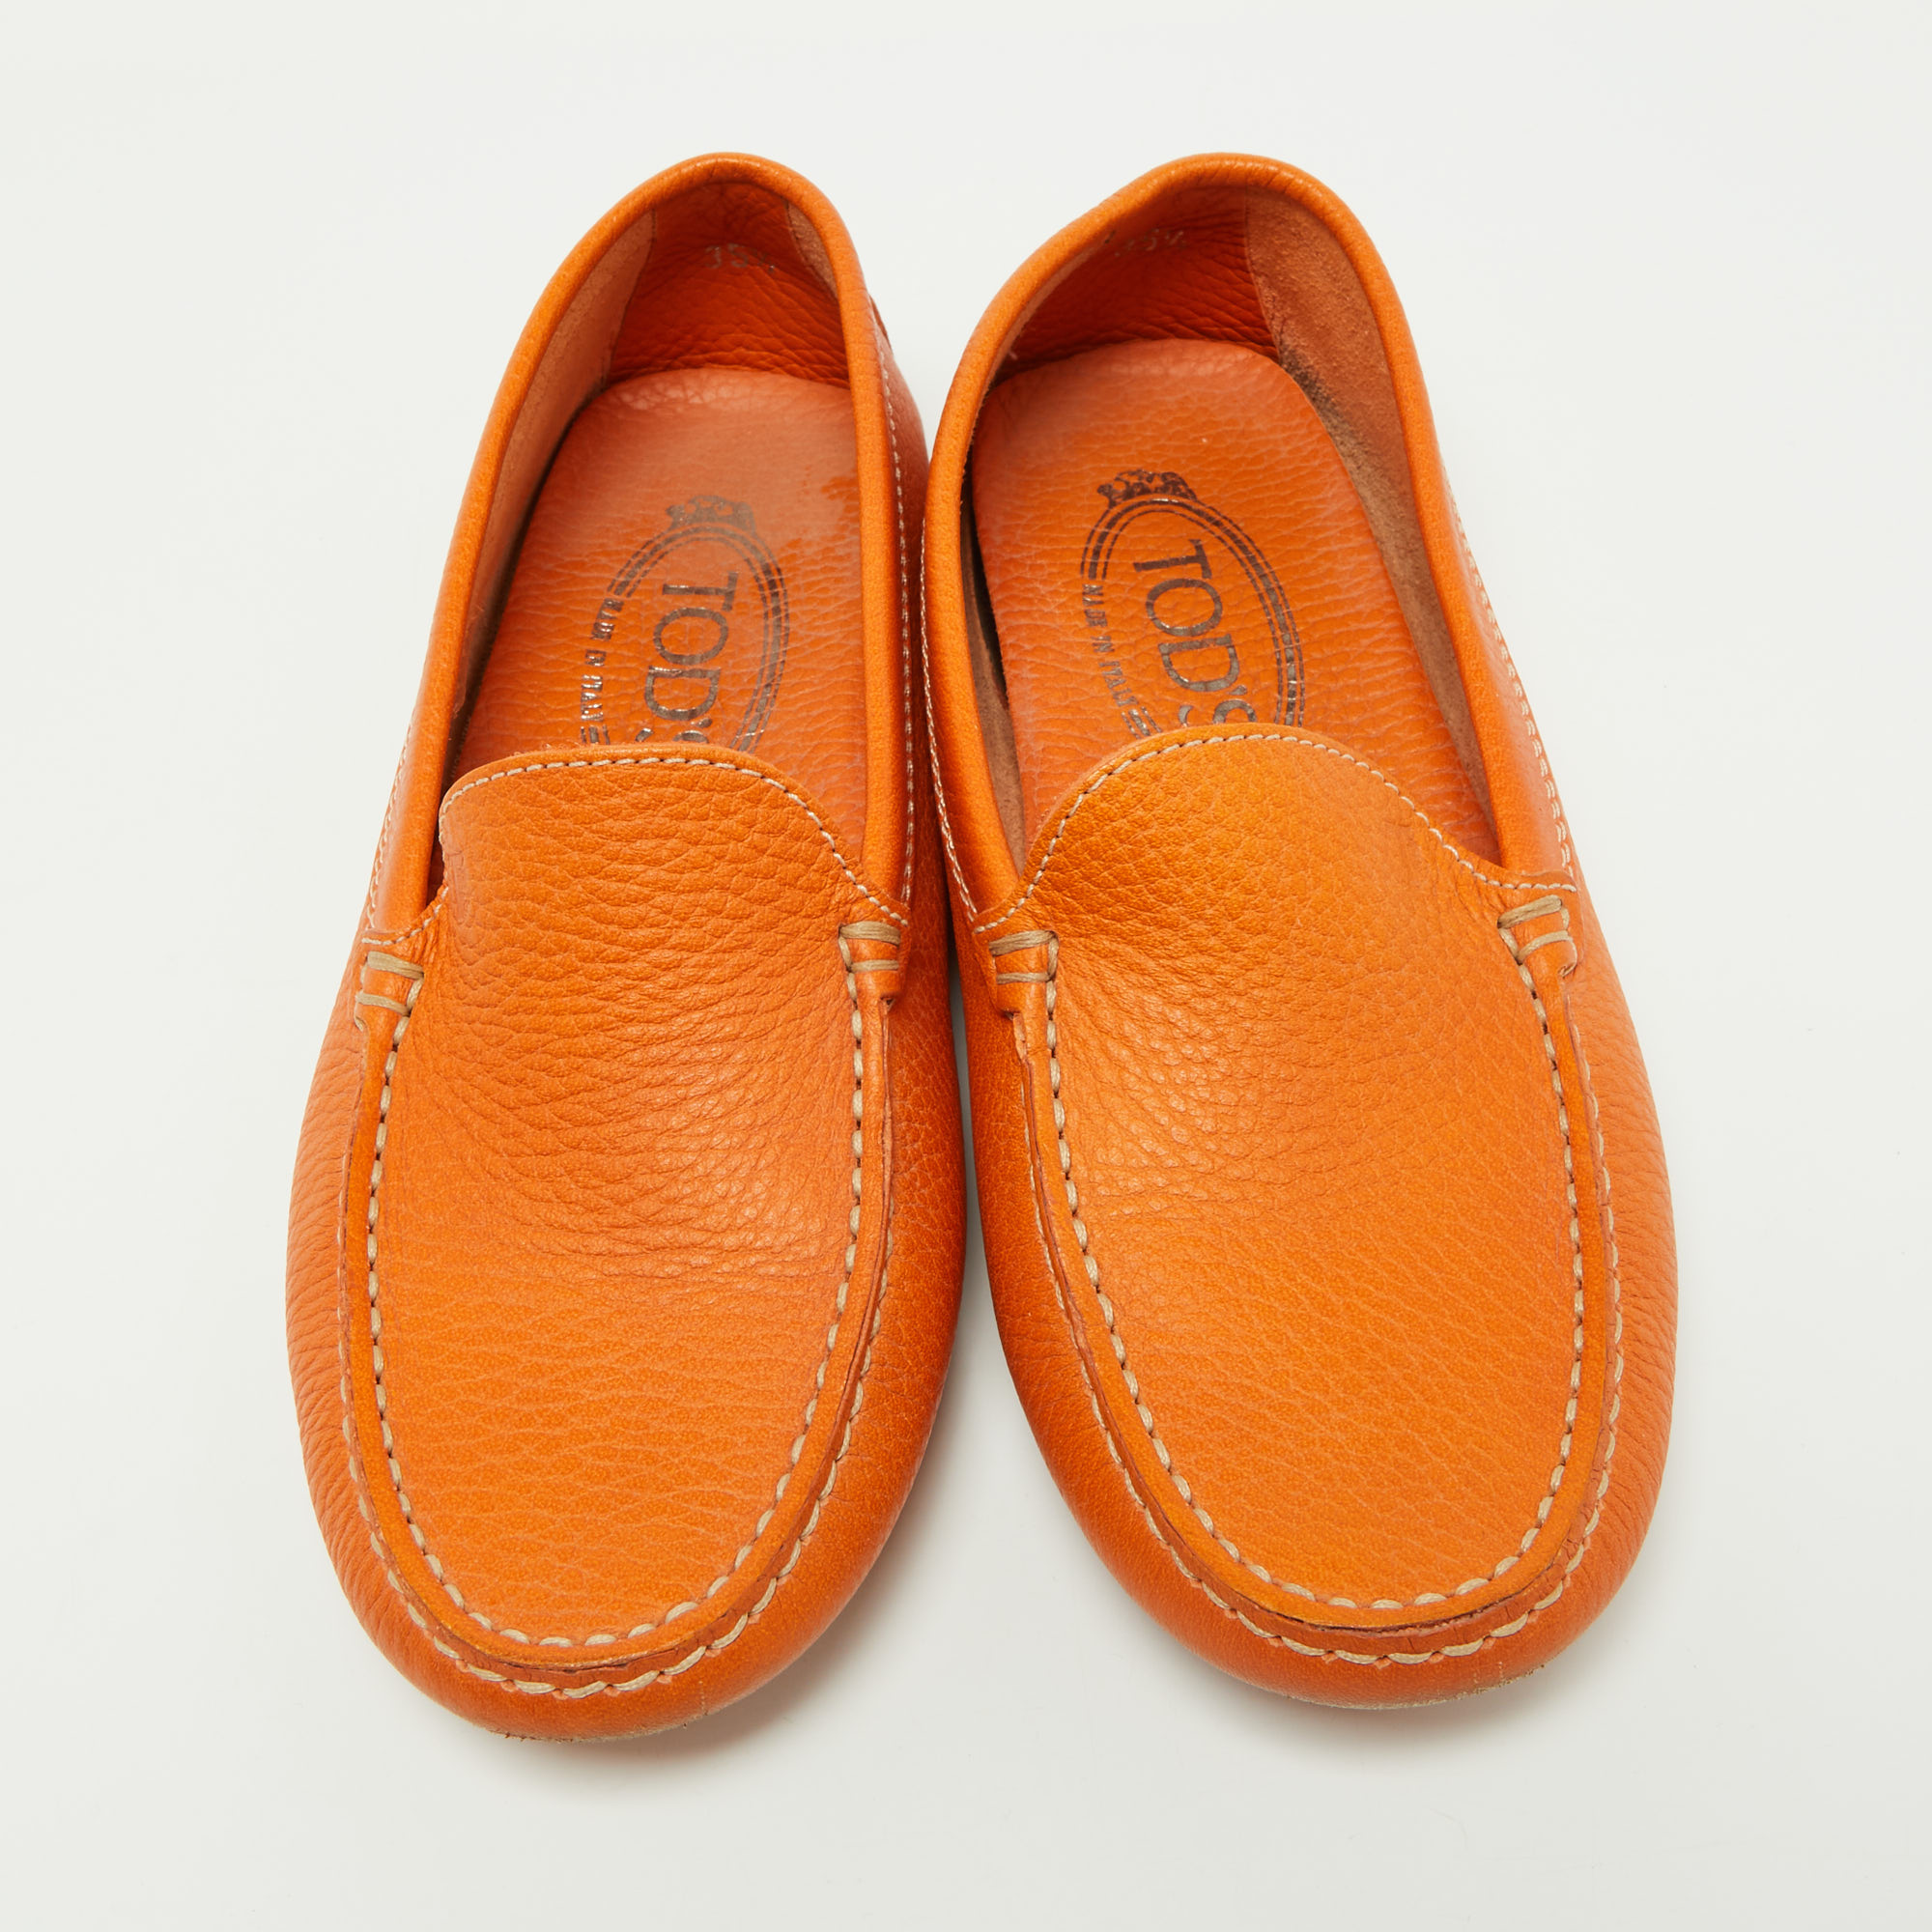 Tod's Orange Leather Penny Slip On Loafers Size 35.5